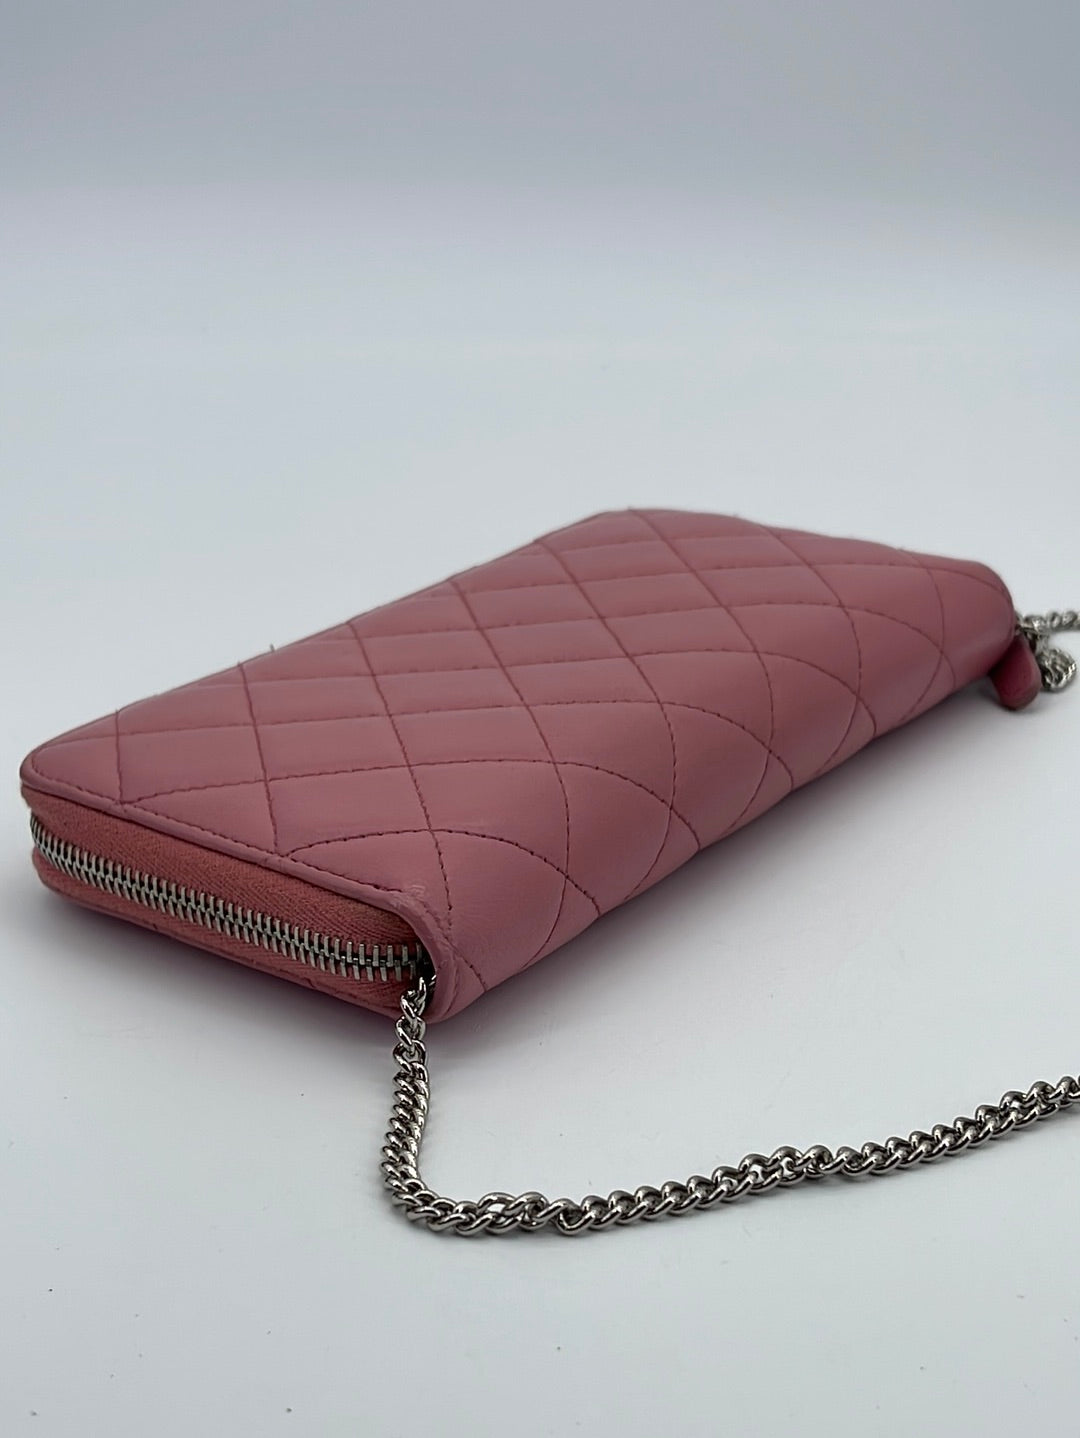 Chanel Pink Quilted Lambskin Leather L Yen Wallet